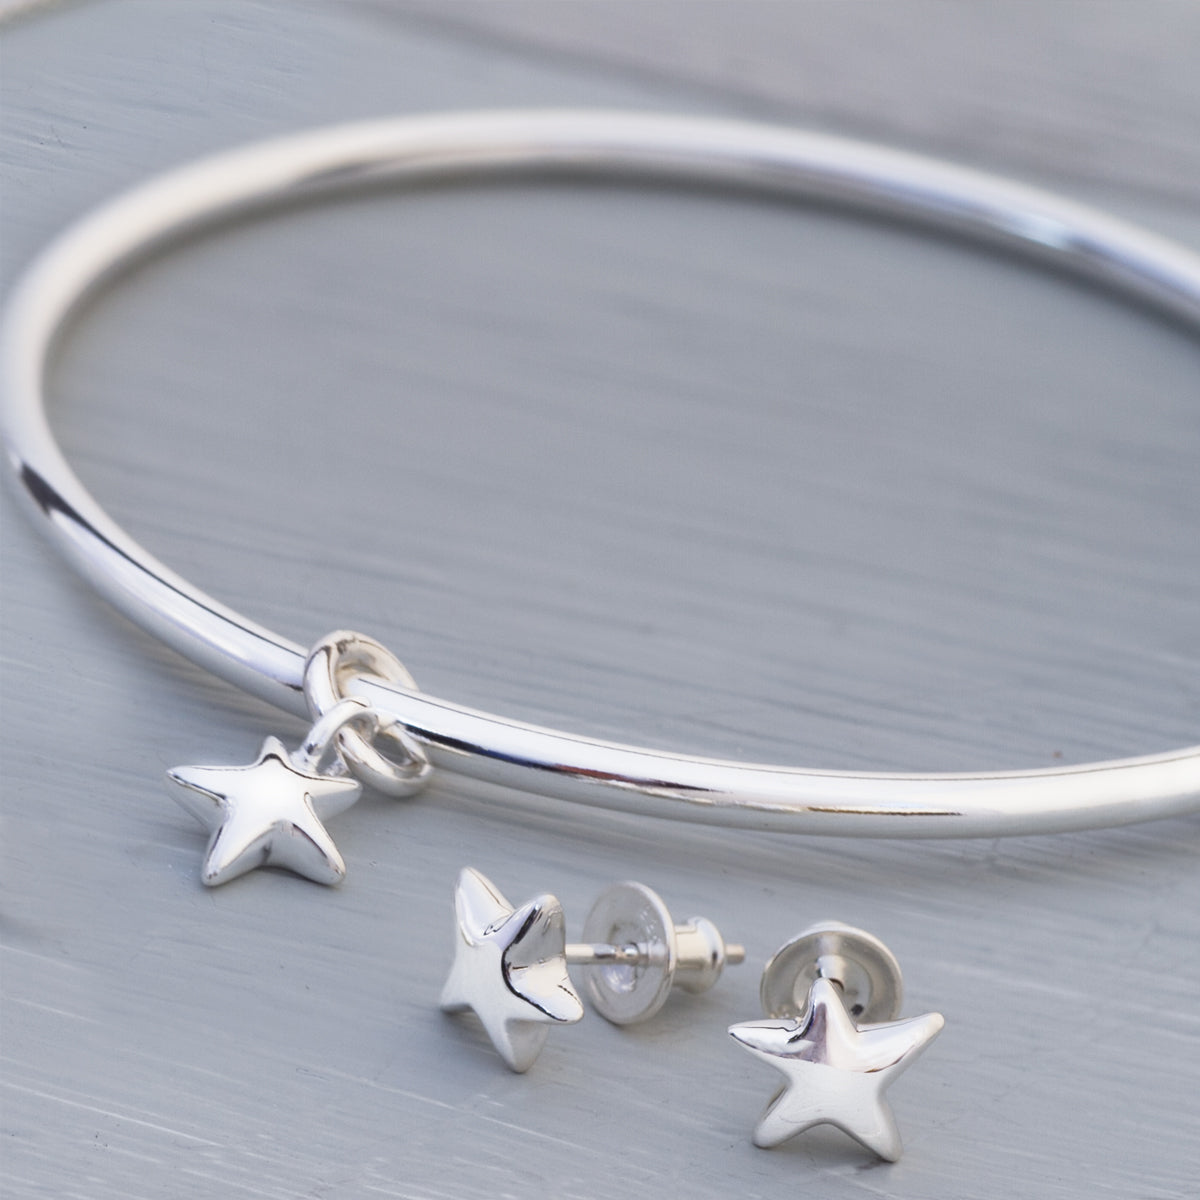 Silver star charm bangle designer and matching star earrings jewellery Scarlett Made in Brighton UK